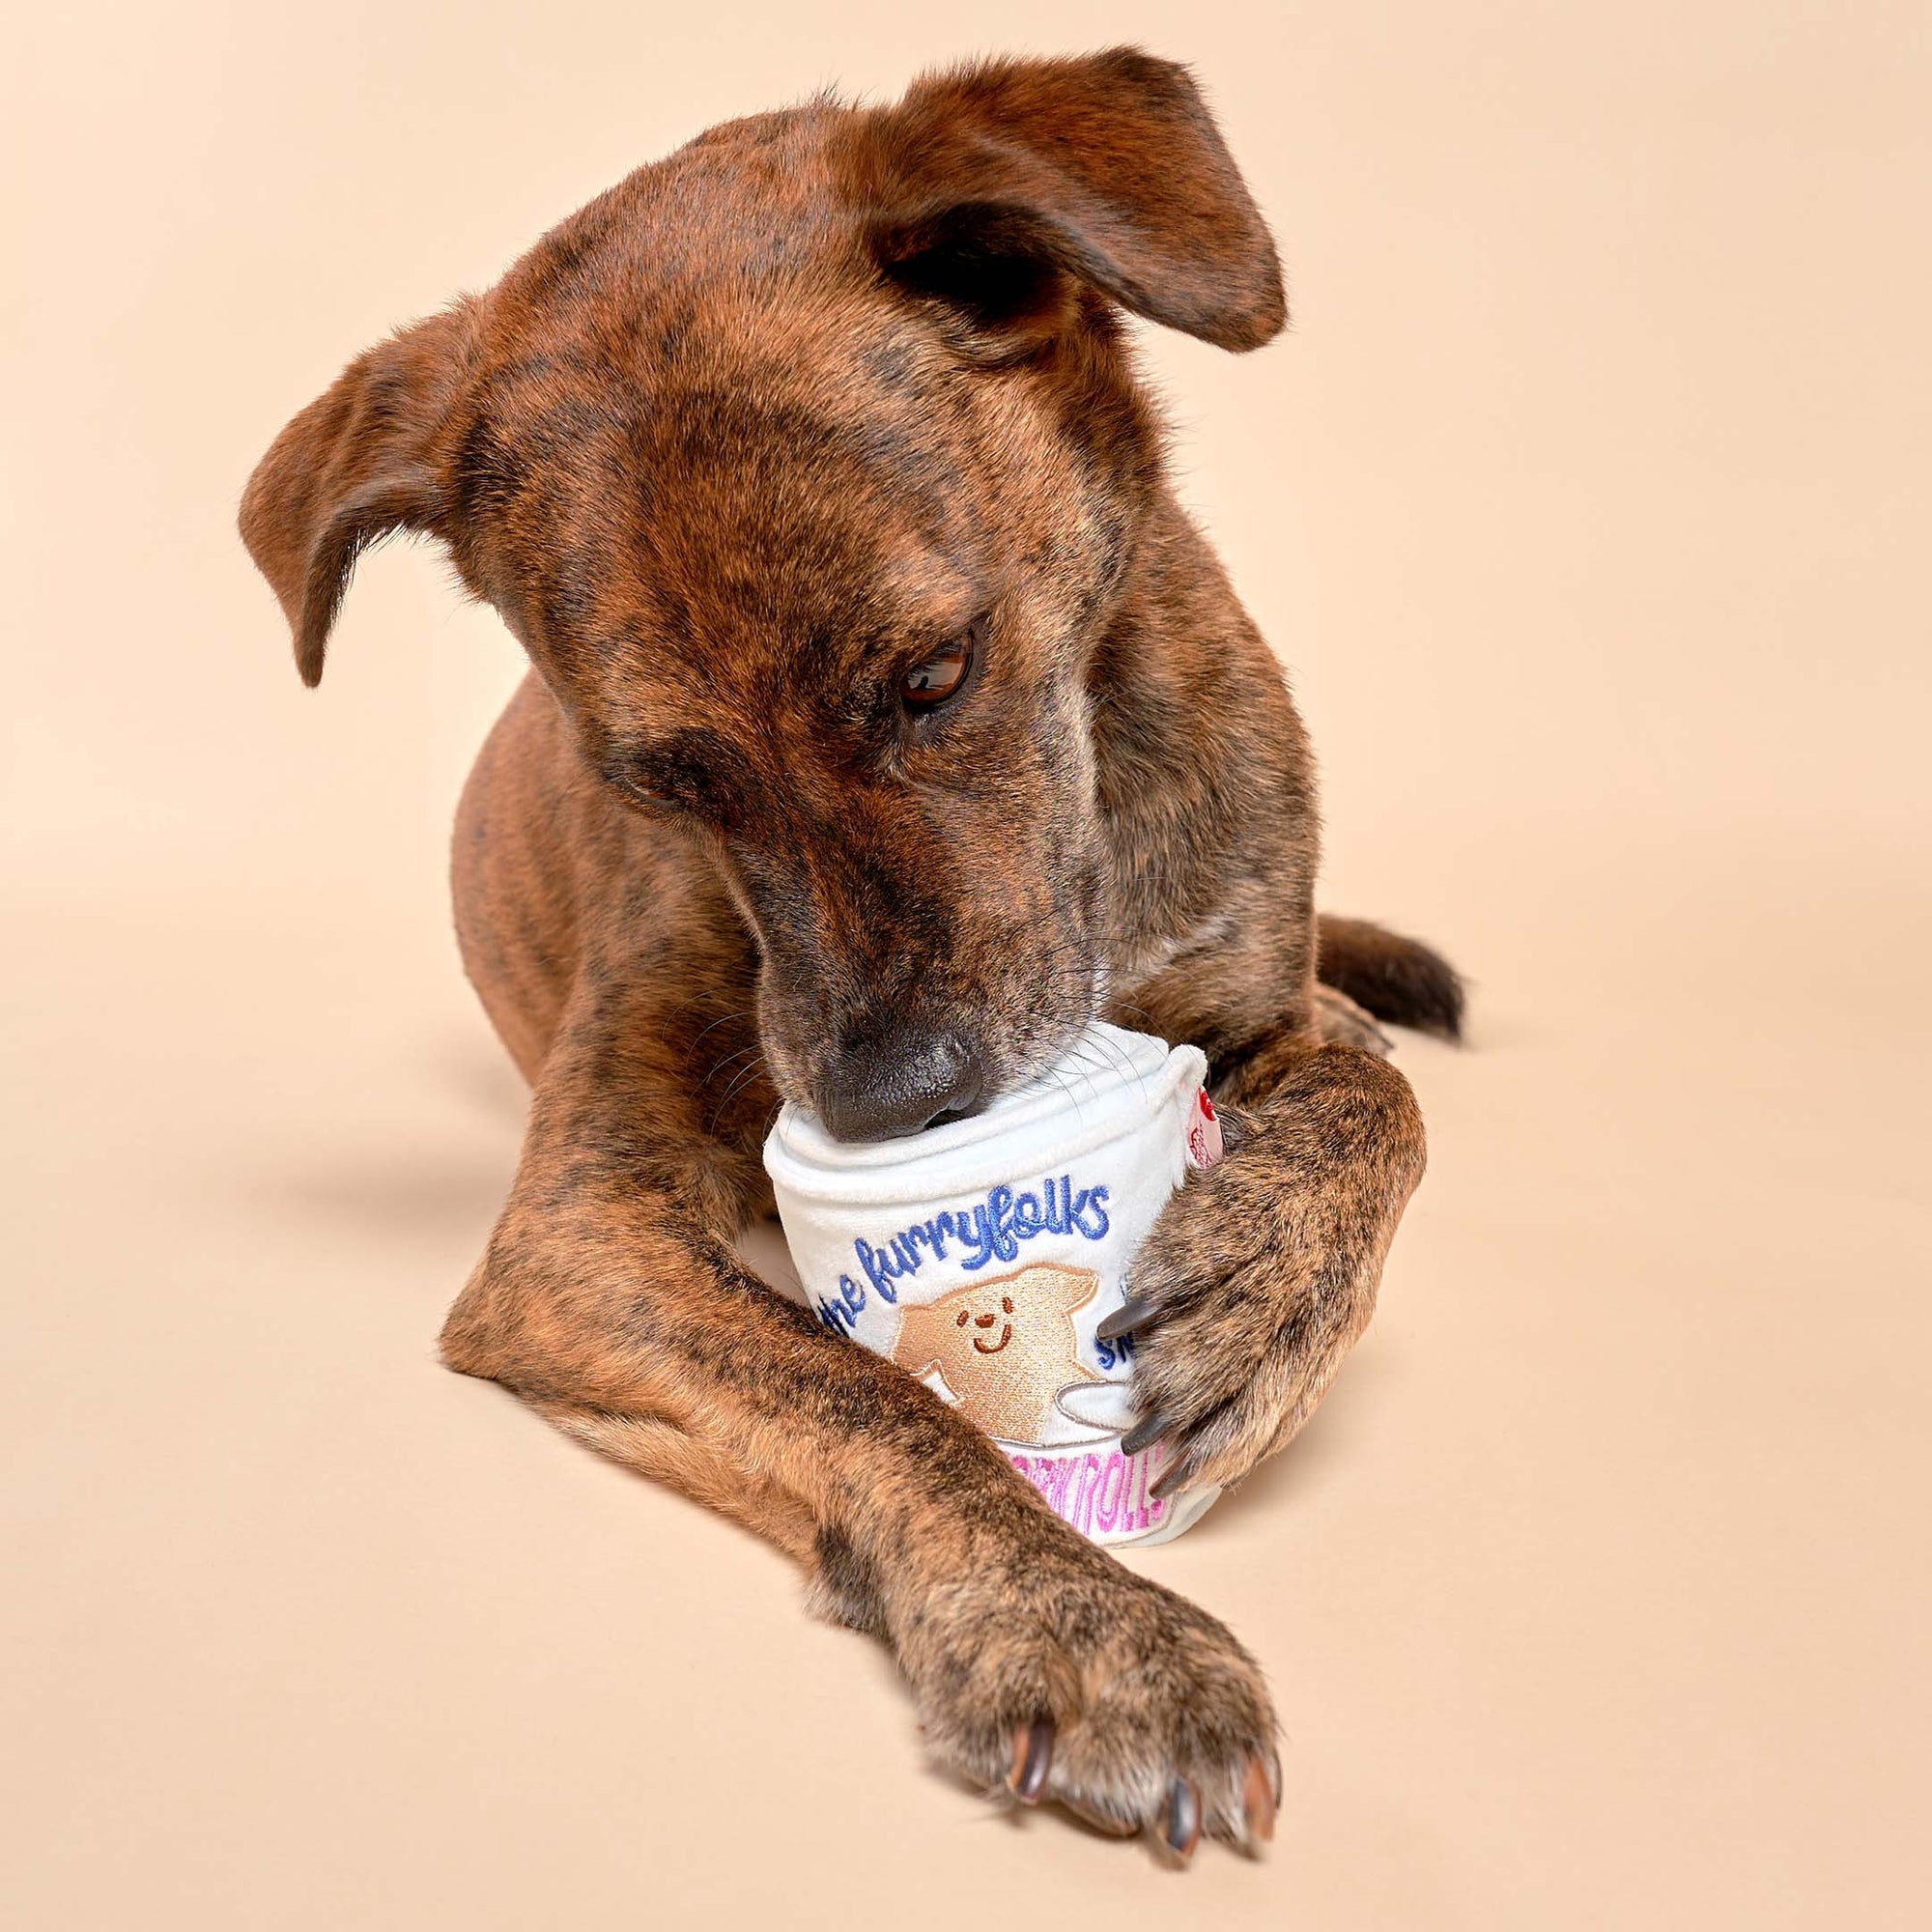 The photo captures a brindle dog closely inspecting a plush toy, which is embroidered with "The Furryfolks" branding. The toy, likely a playful and stimulating product for pets, is held between the dog's paws, suggesting a moment of playful interaction. The beige backdrop focuses attention on the dog's engaging activity with the toy.